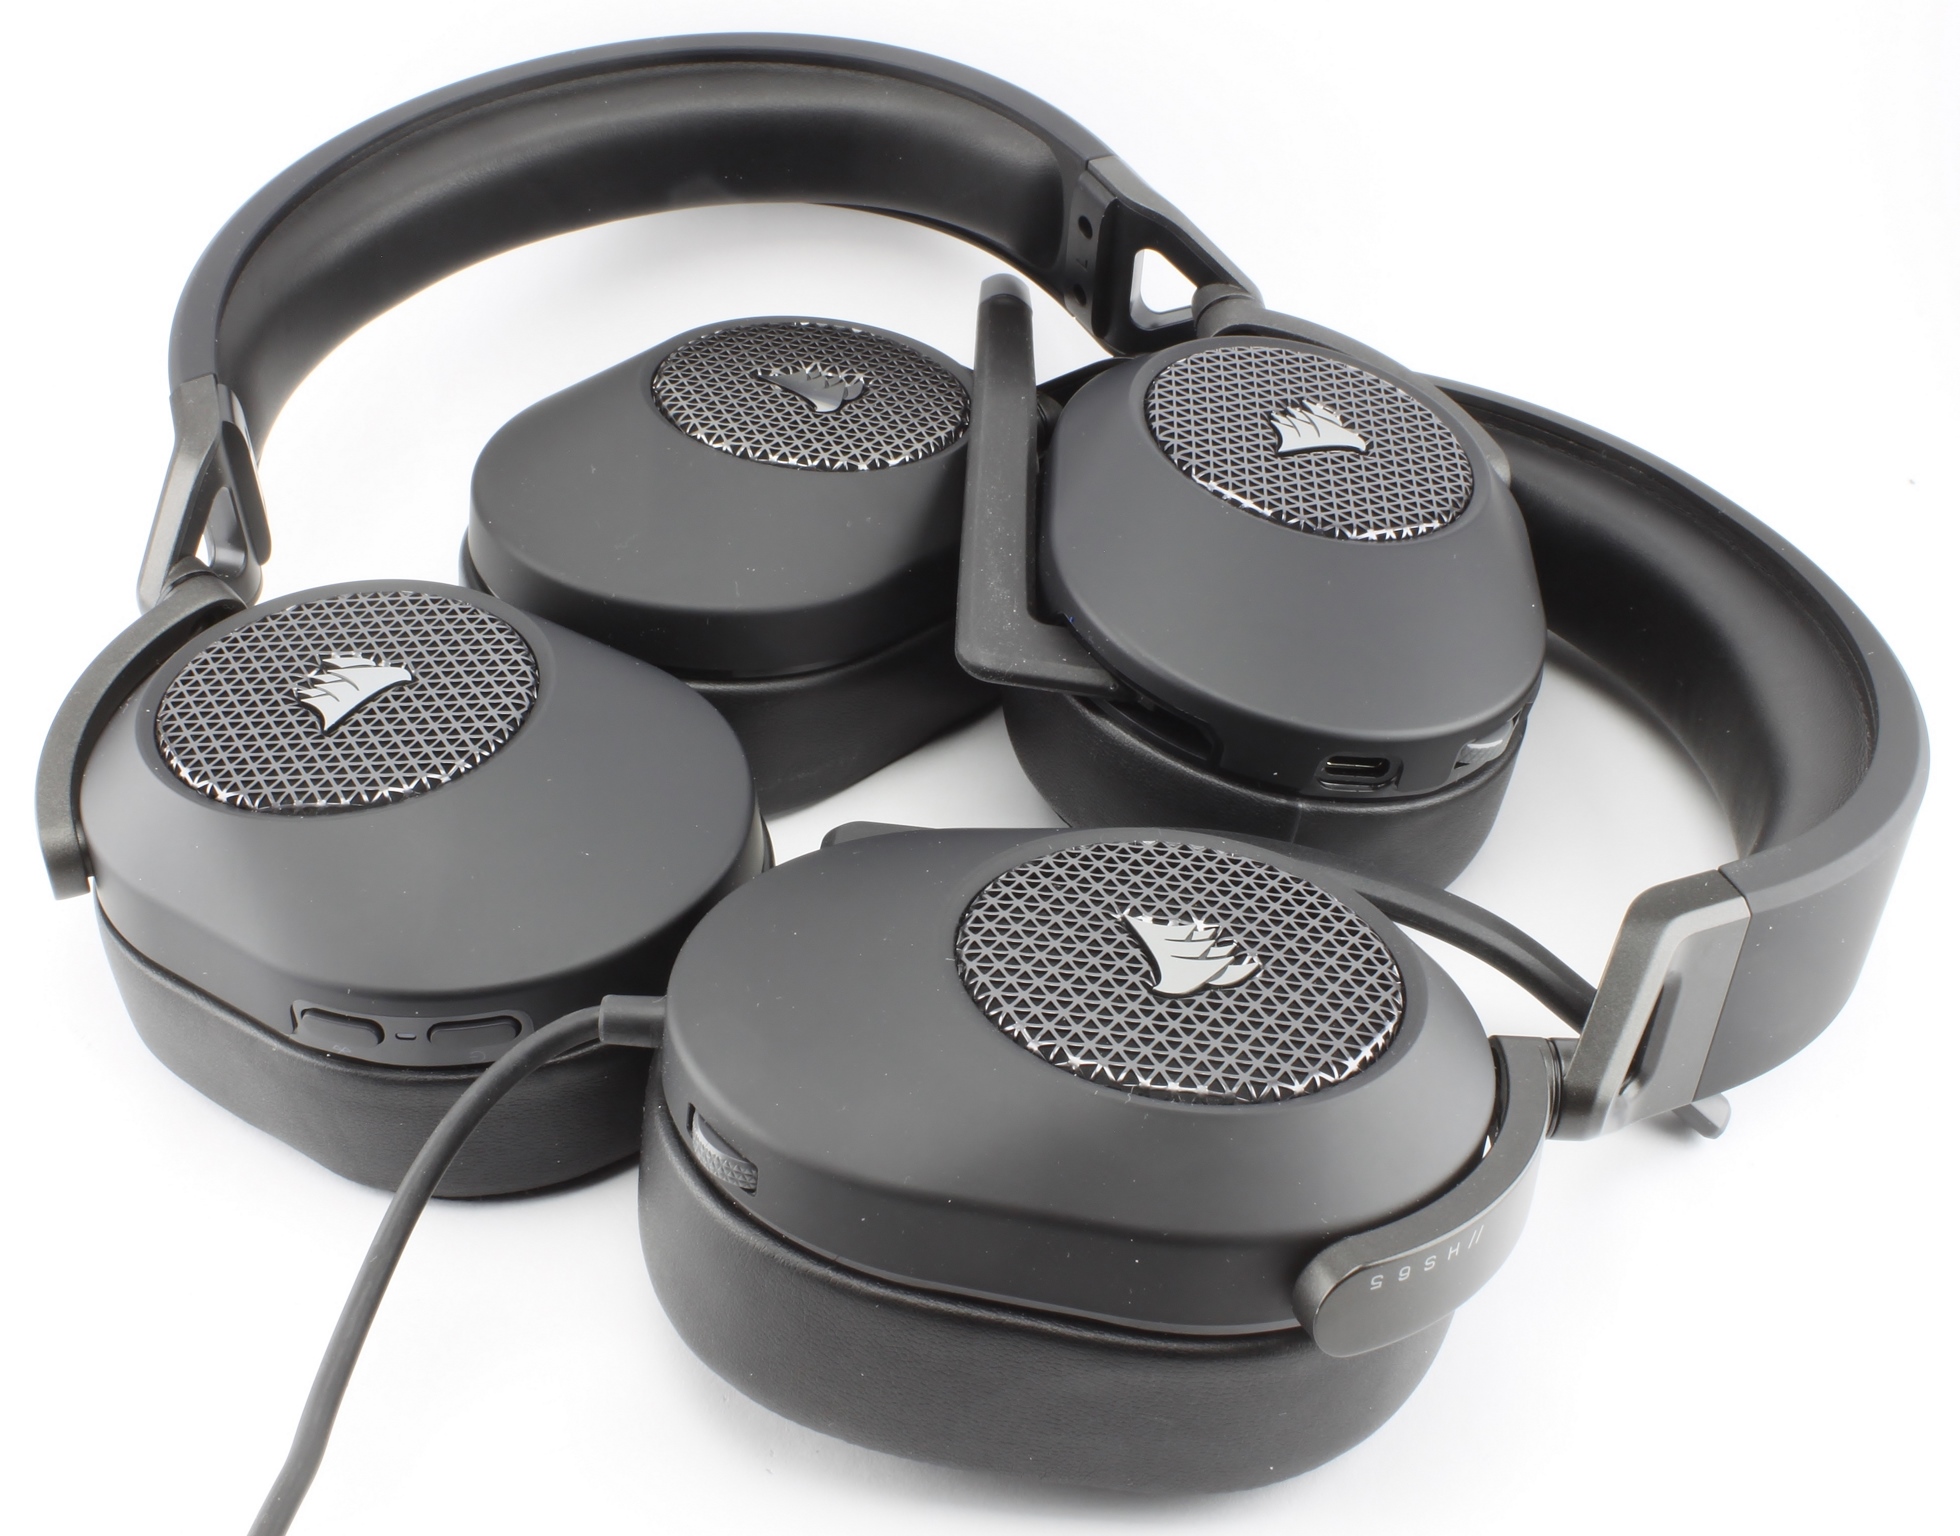 headset a - premium Wireless igor´sLAB Review gaming mid-range at HS65 price Solid CORSAIR |